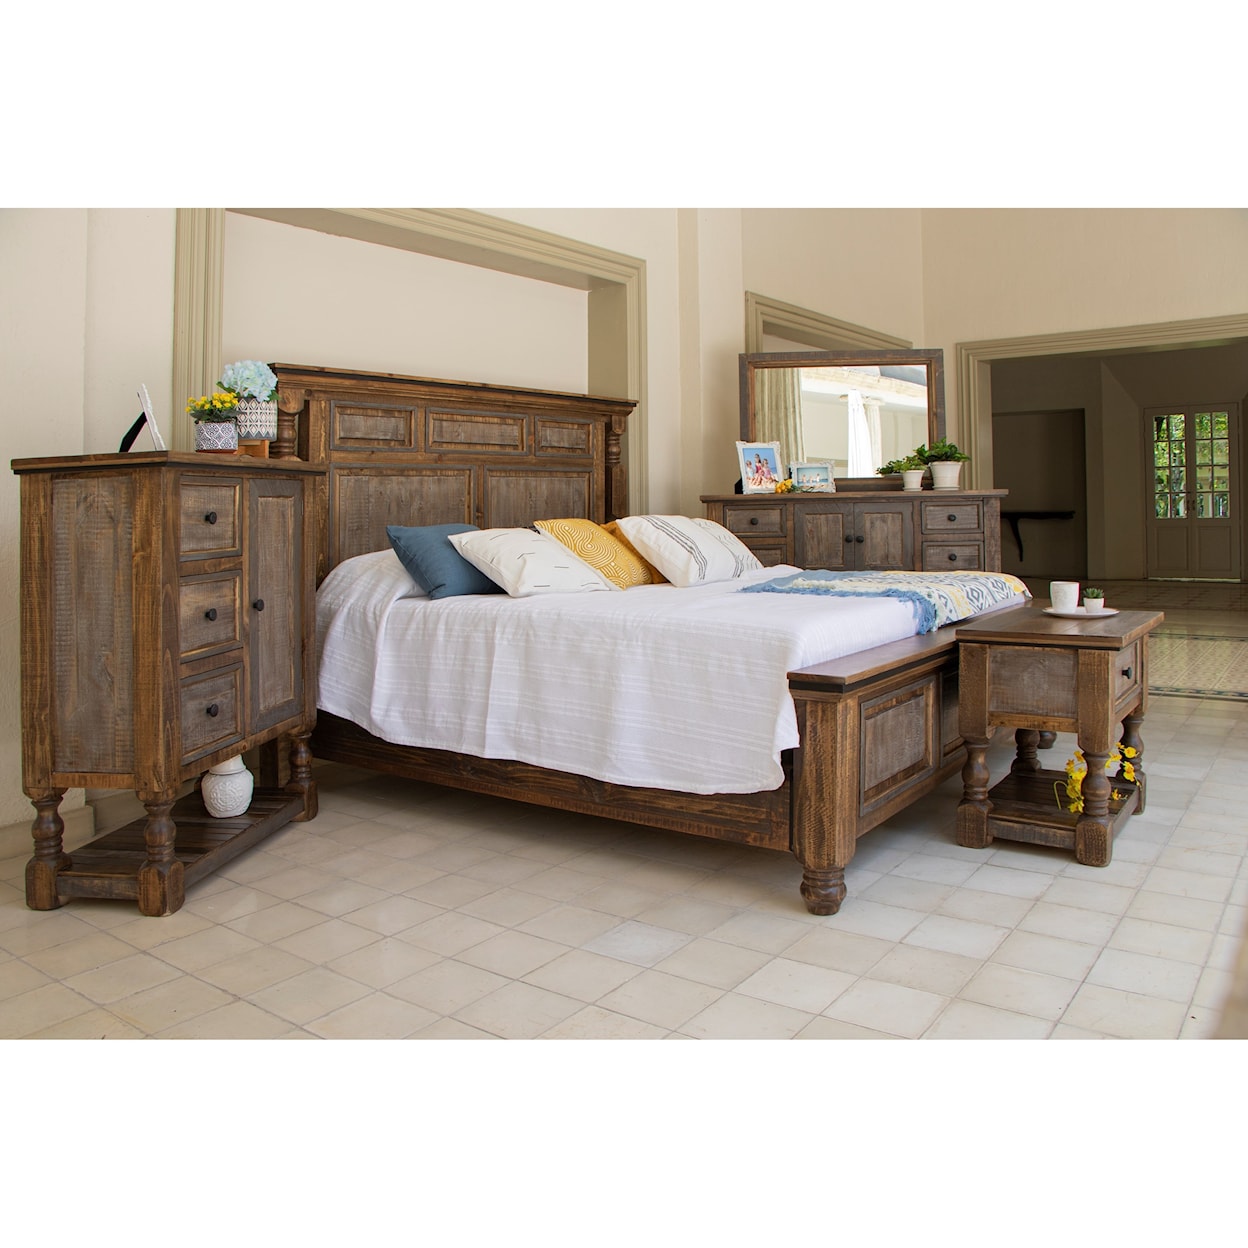 International Furniture Direct Stone Brown Queen Bed